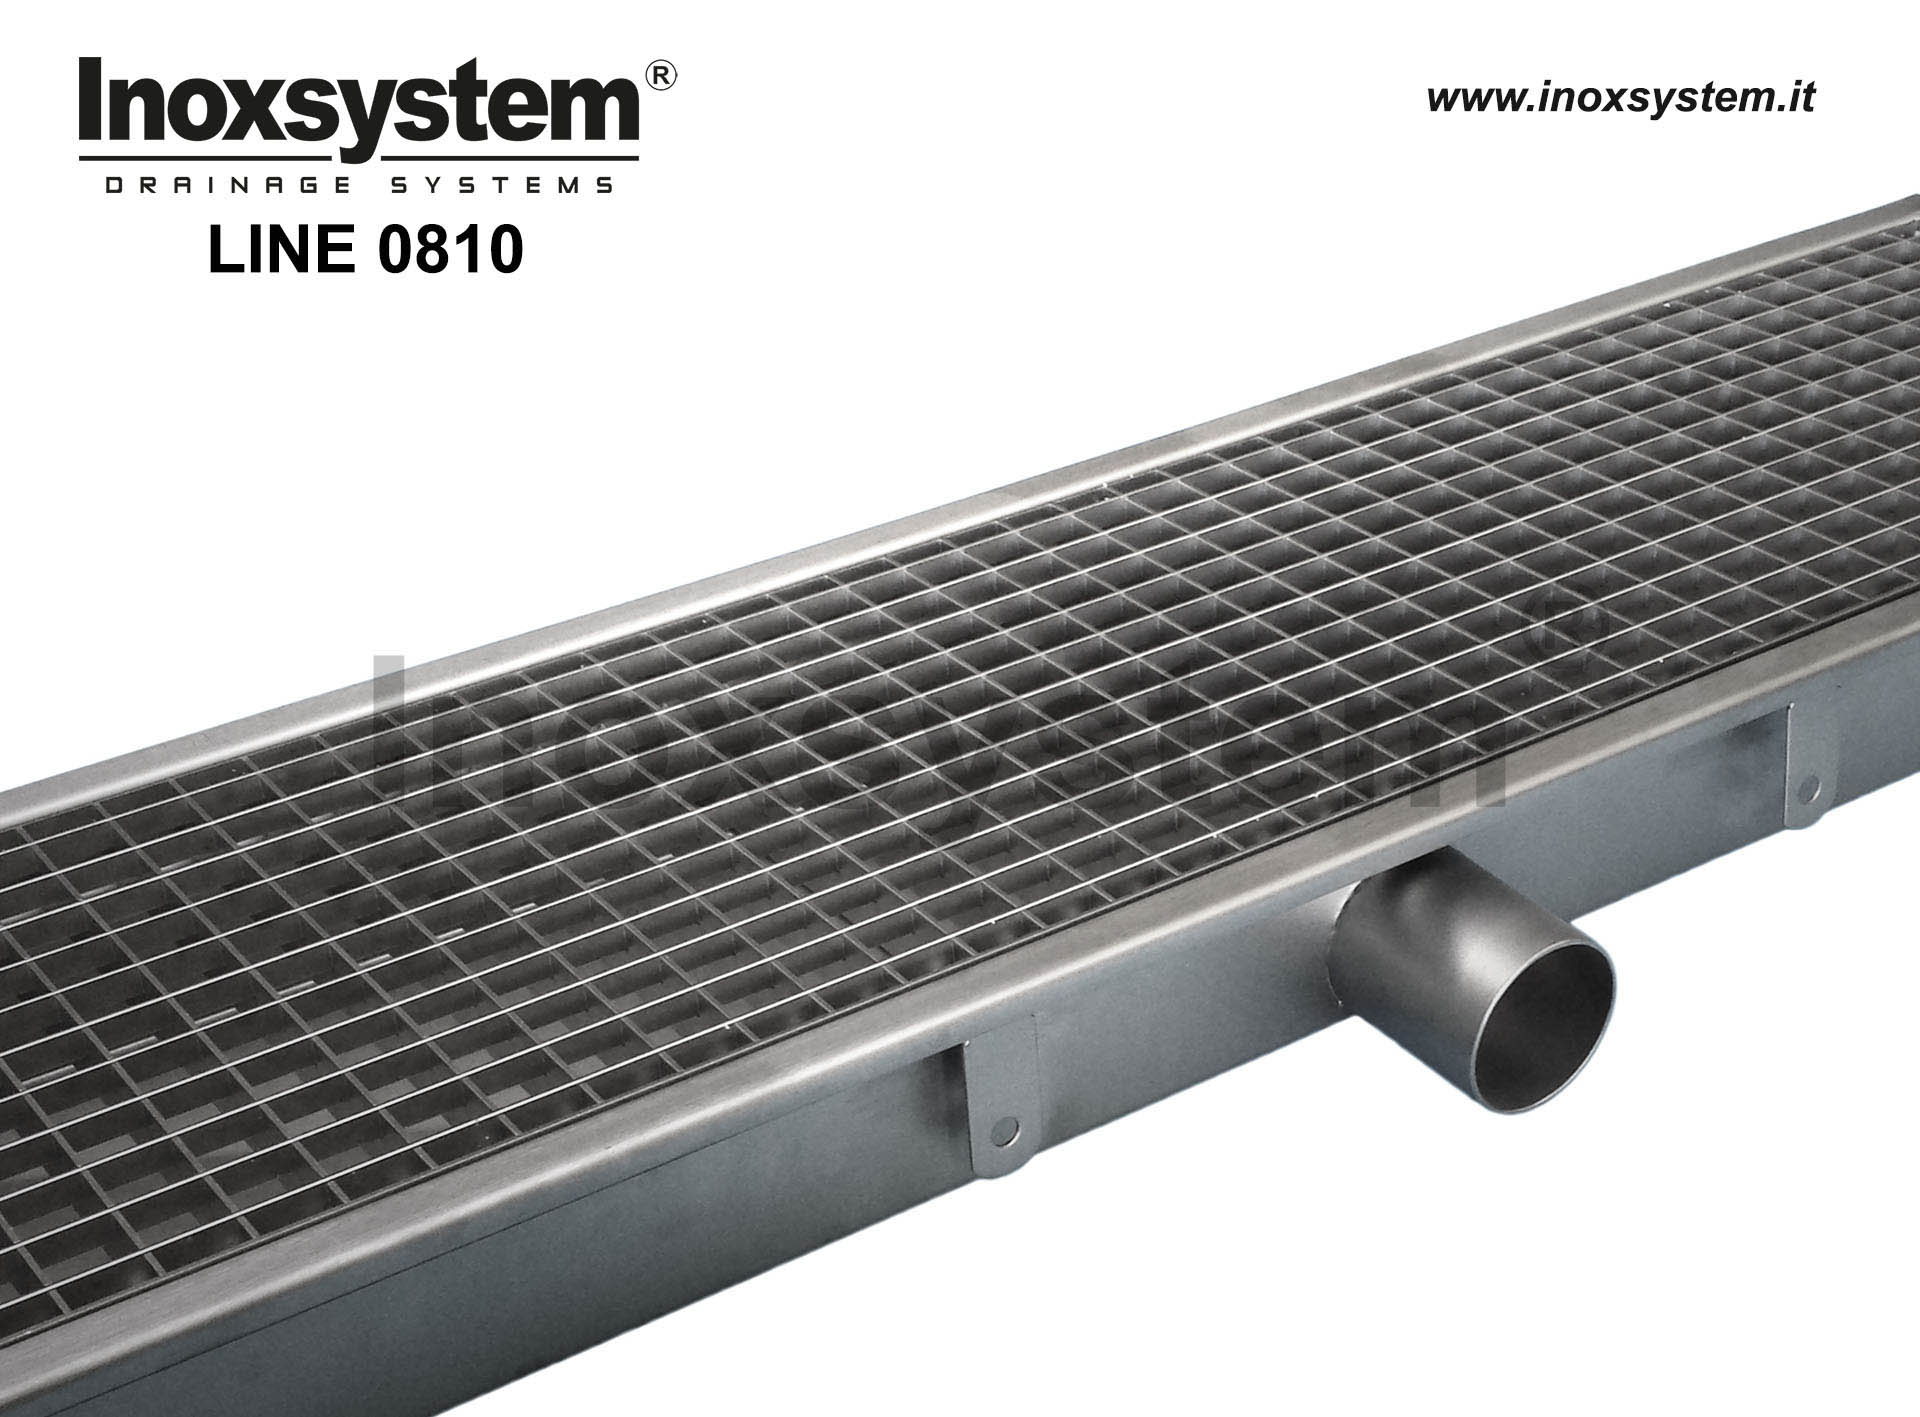 Stainless steel grating channel with direct outlet